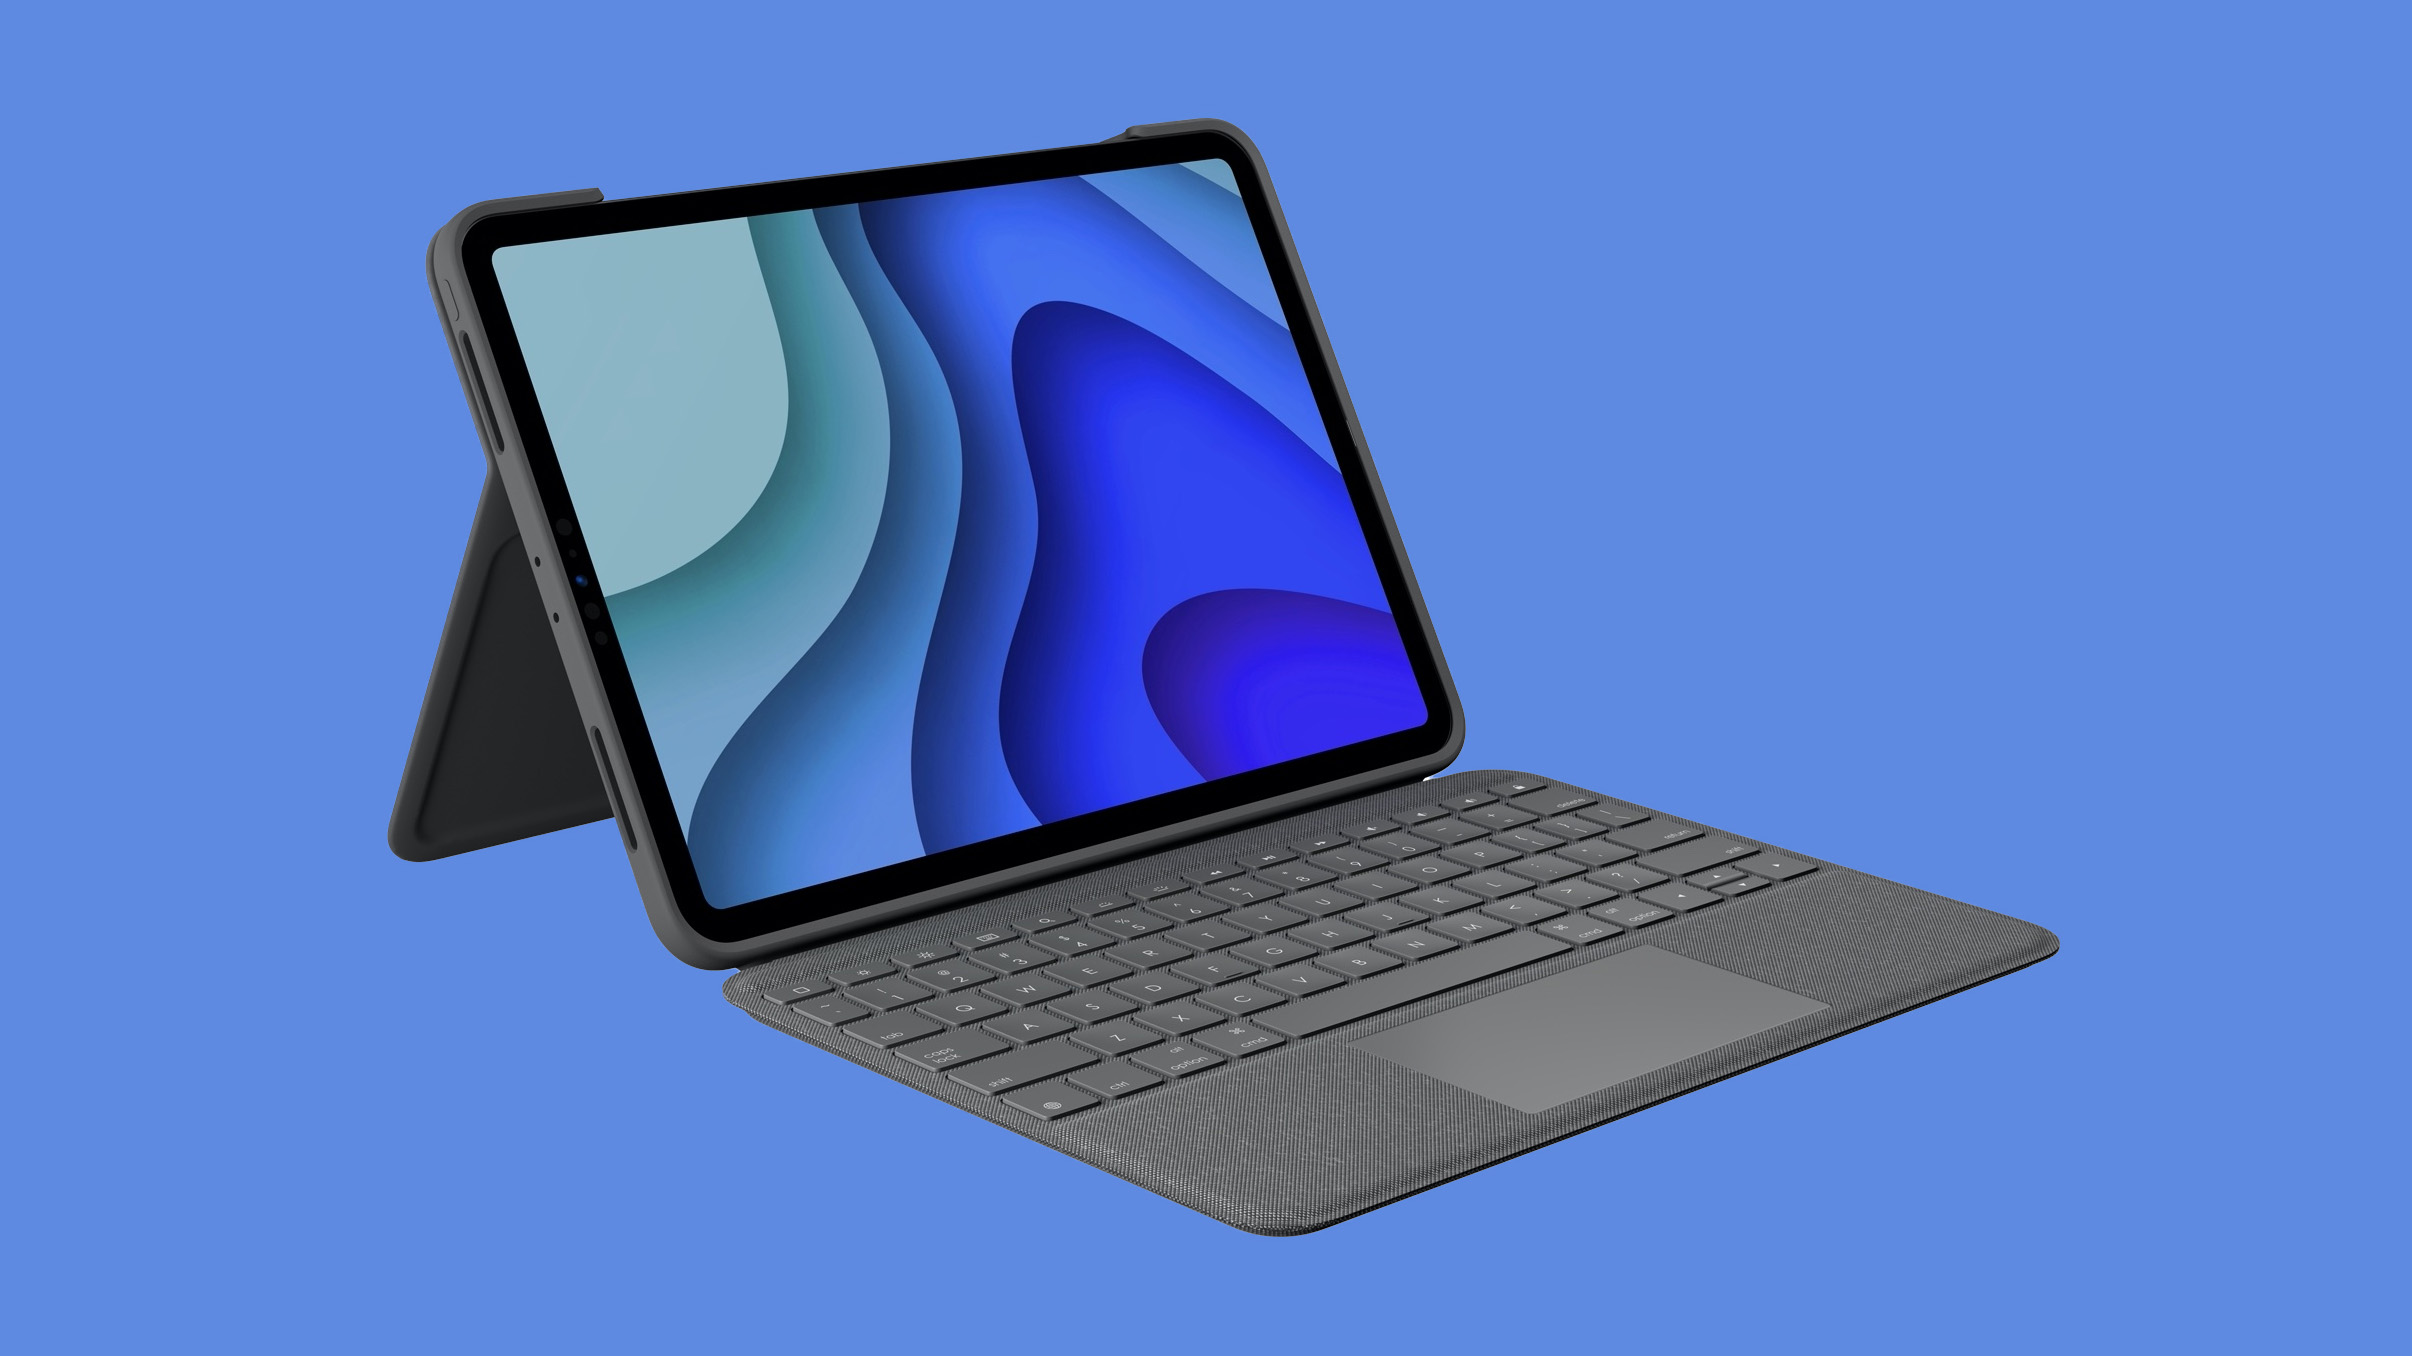 Logitech has launched a new keyboard case for the ’11-inch iPad Pro’